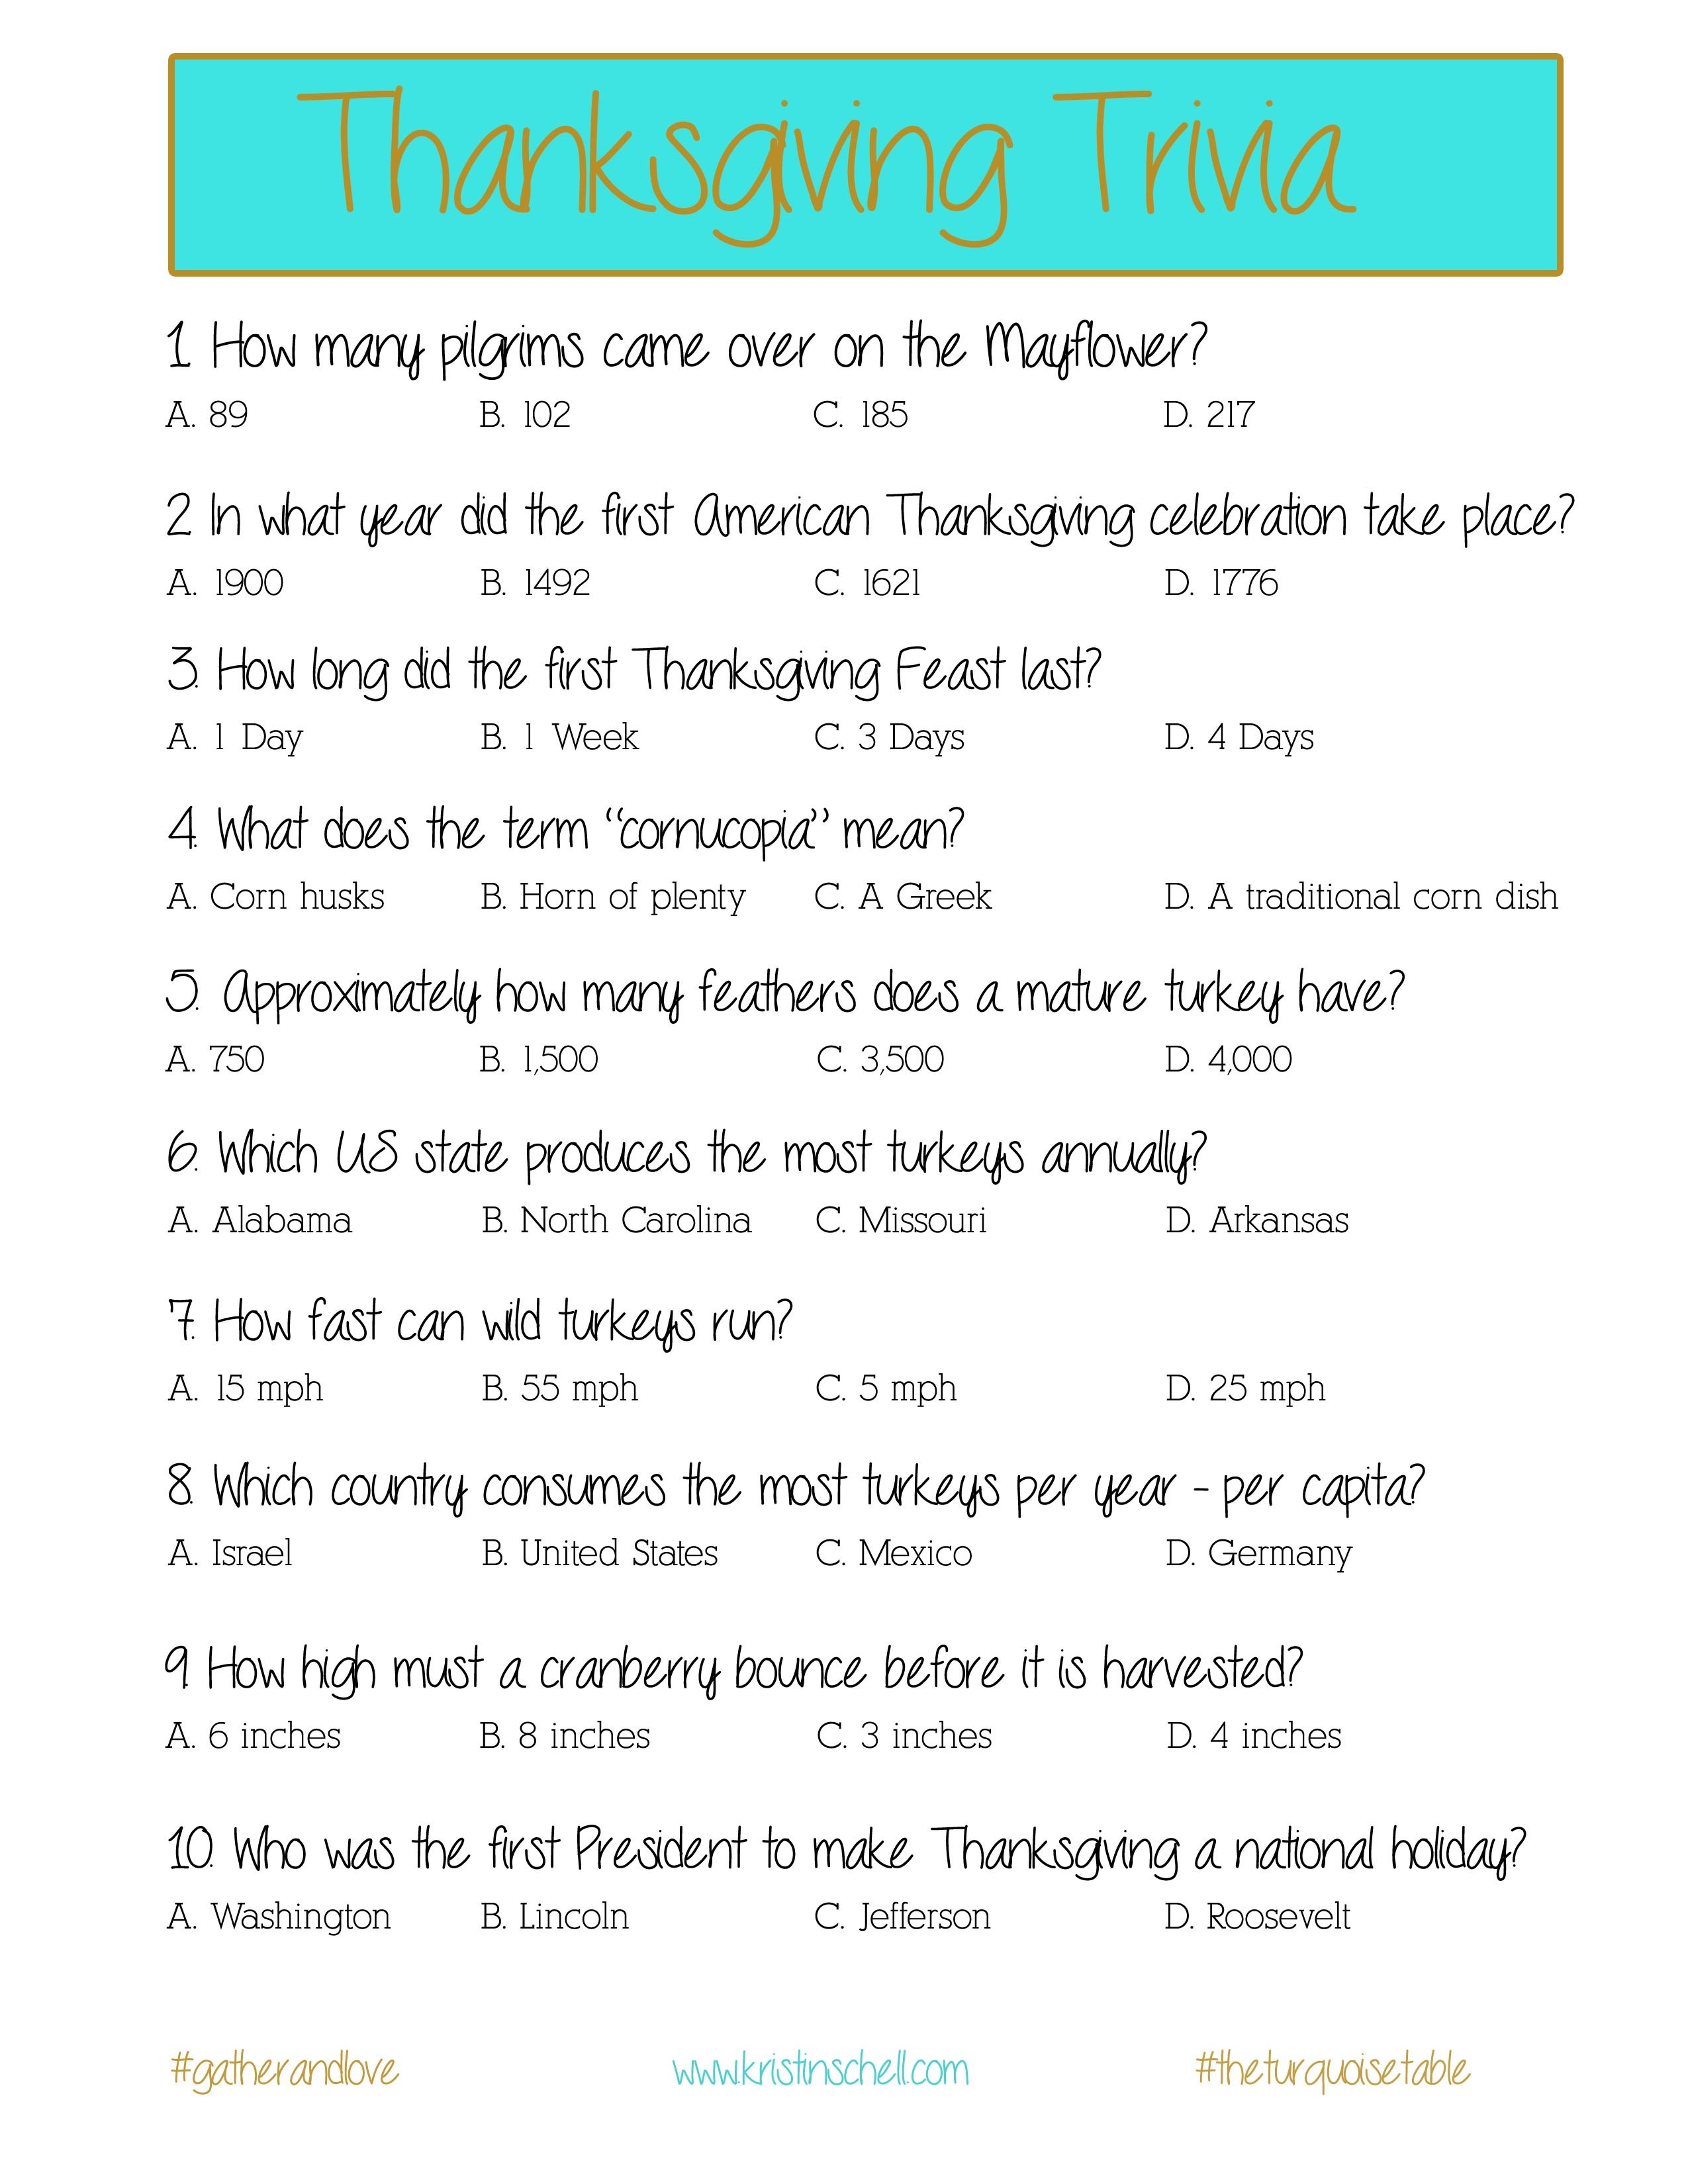 10 Thanksgiving Trivia Questions | Kittybabylove - Free Printable Trivia Questions And Answers